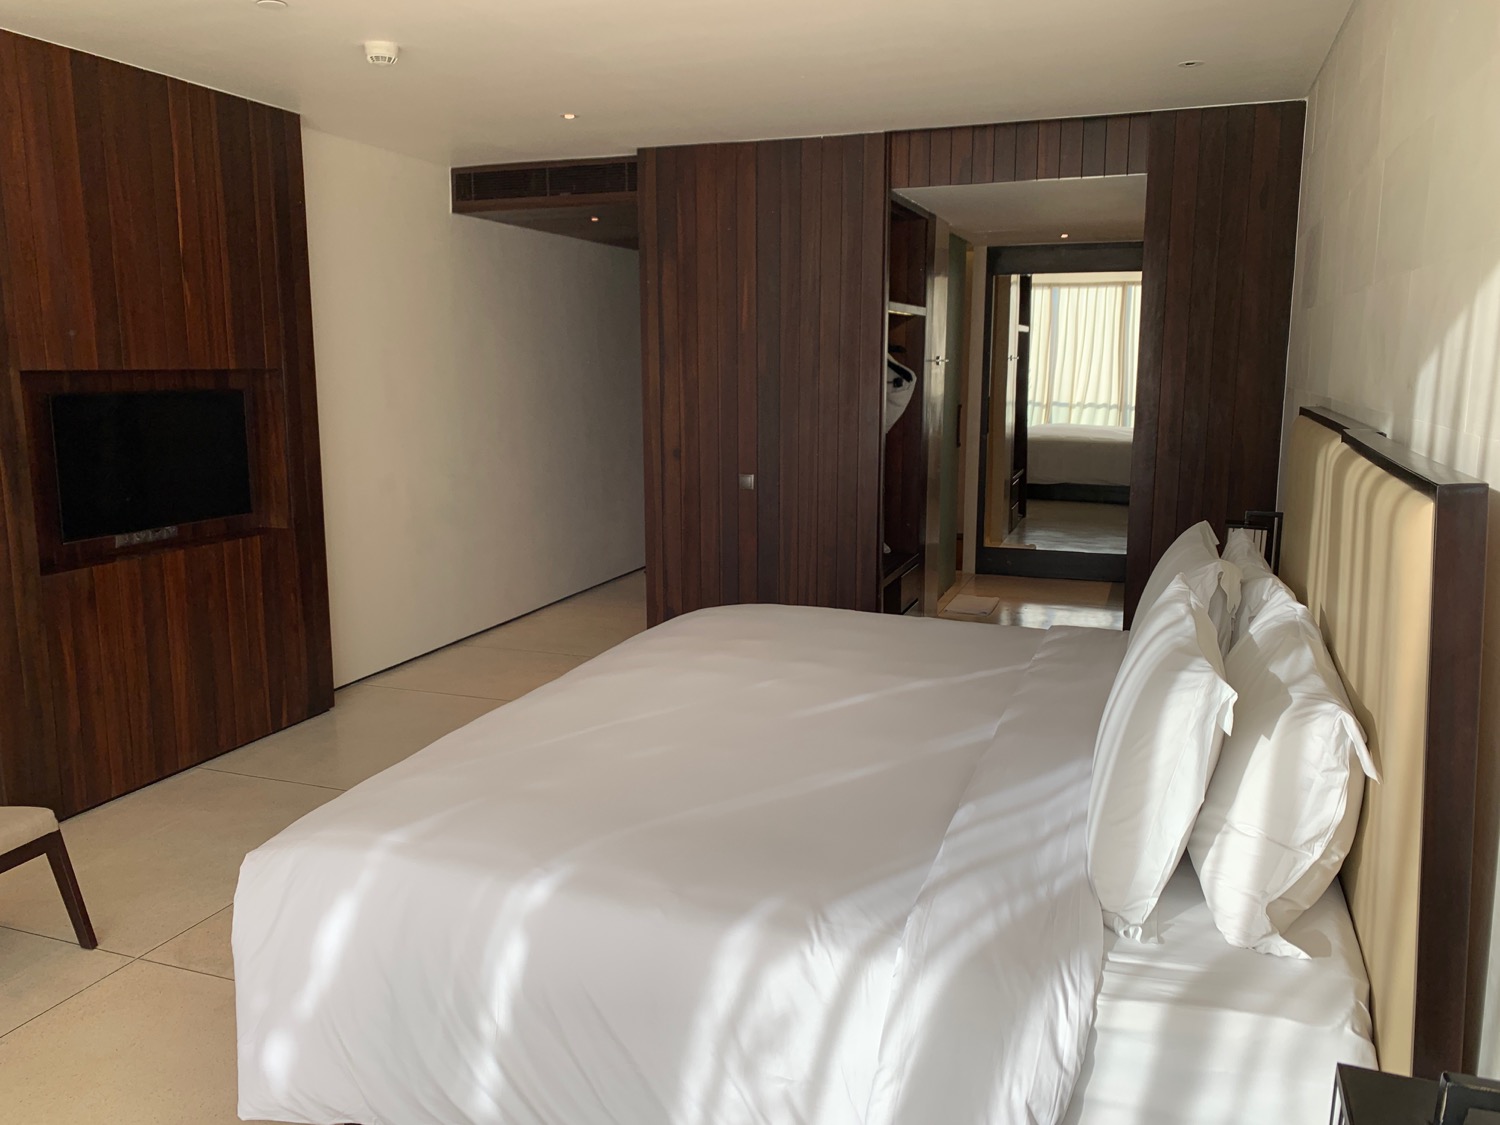 a bed with white sheets and a wood paneled wall